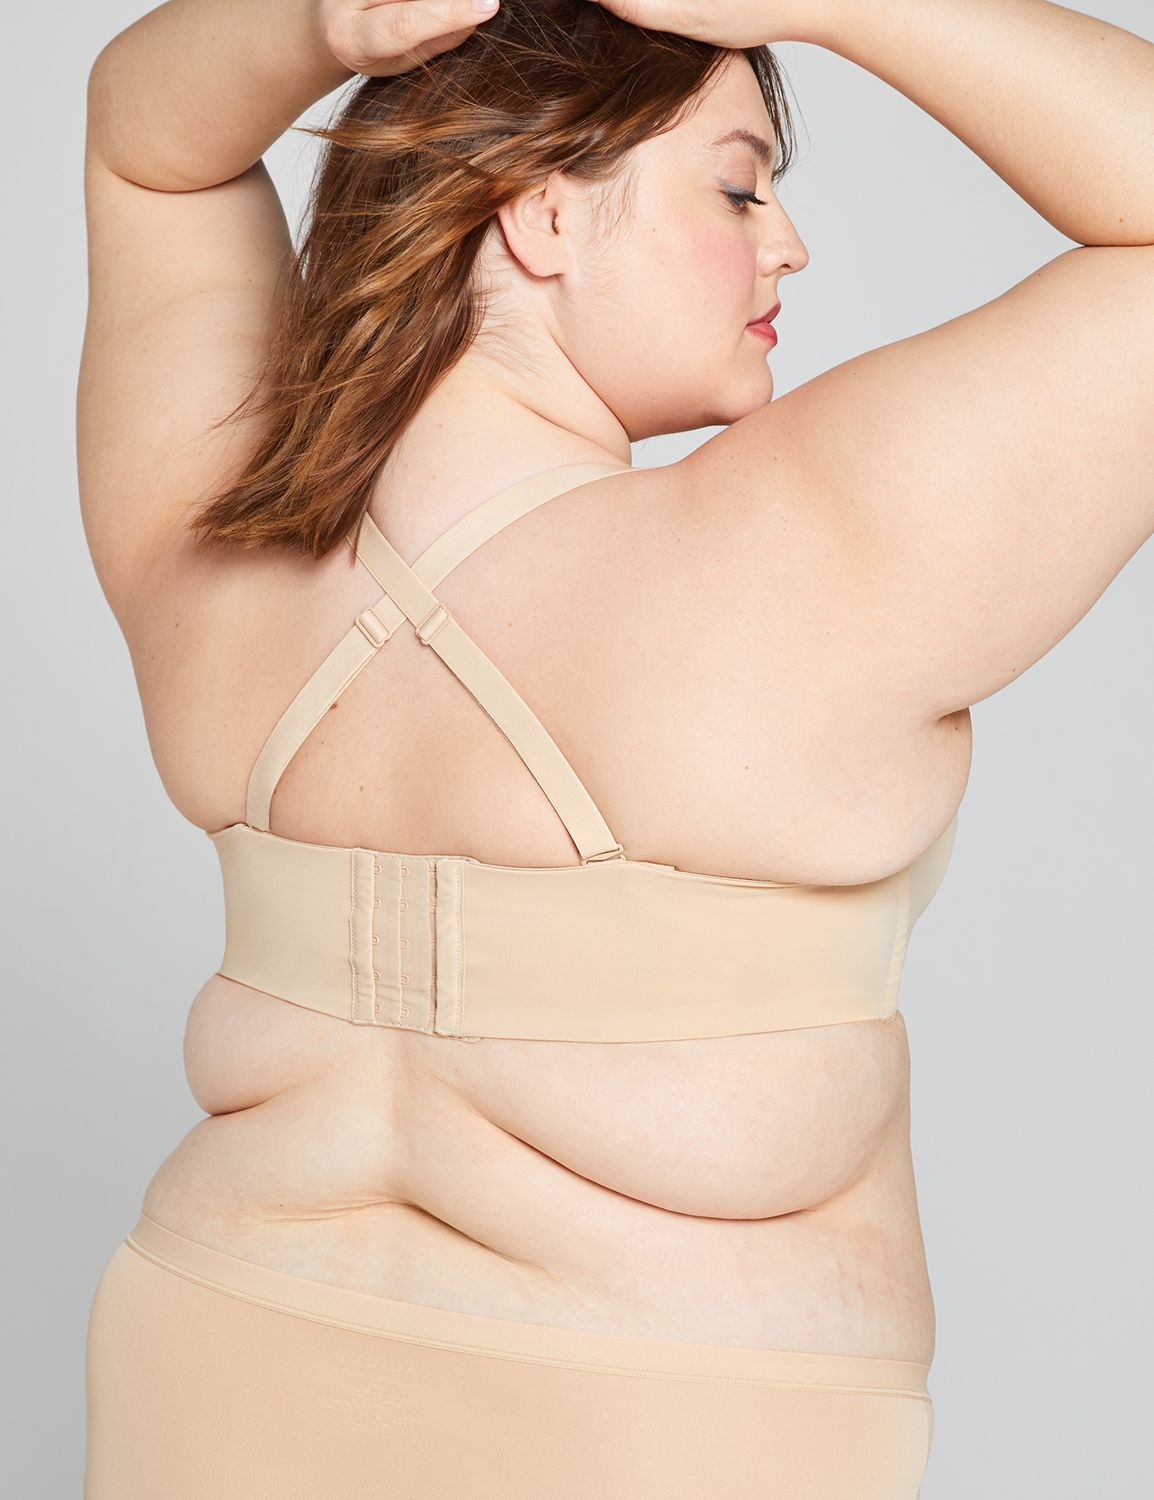 Strapless Bras, Versatile Support & Invisible Fit